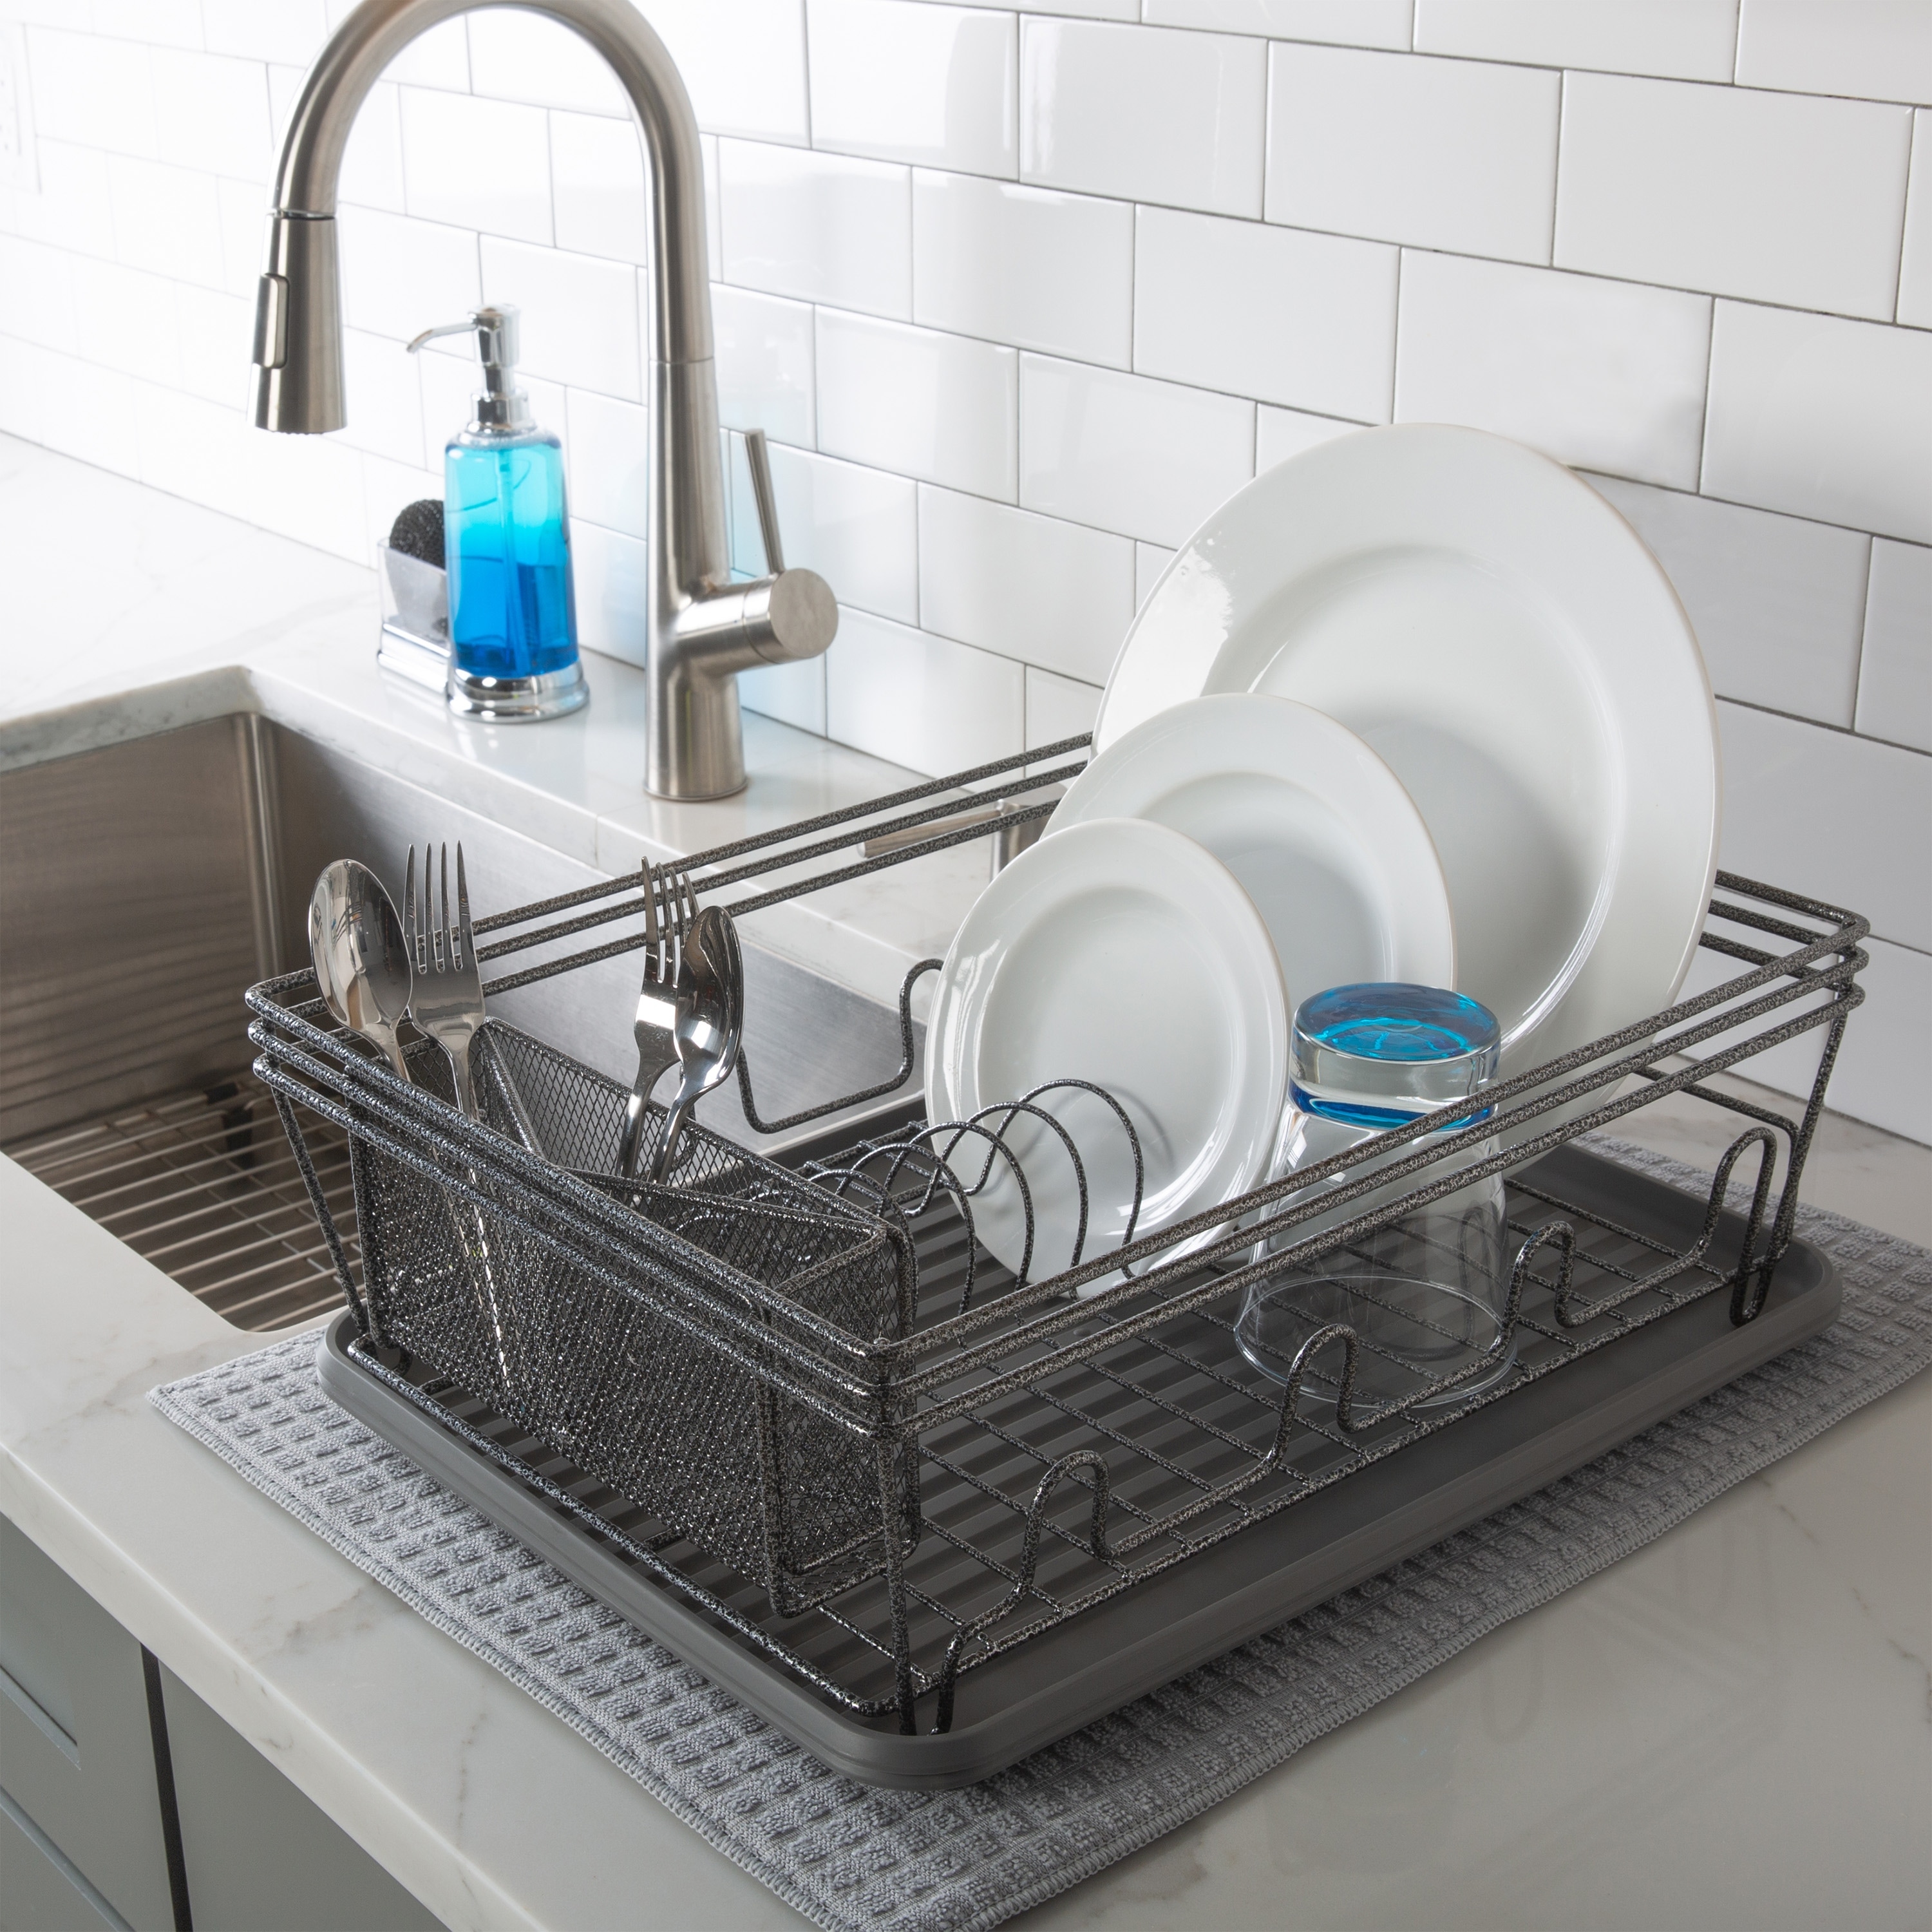 37in. Stainless Steel Dish Drying Rack Over Kitchen Sink, Dishes